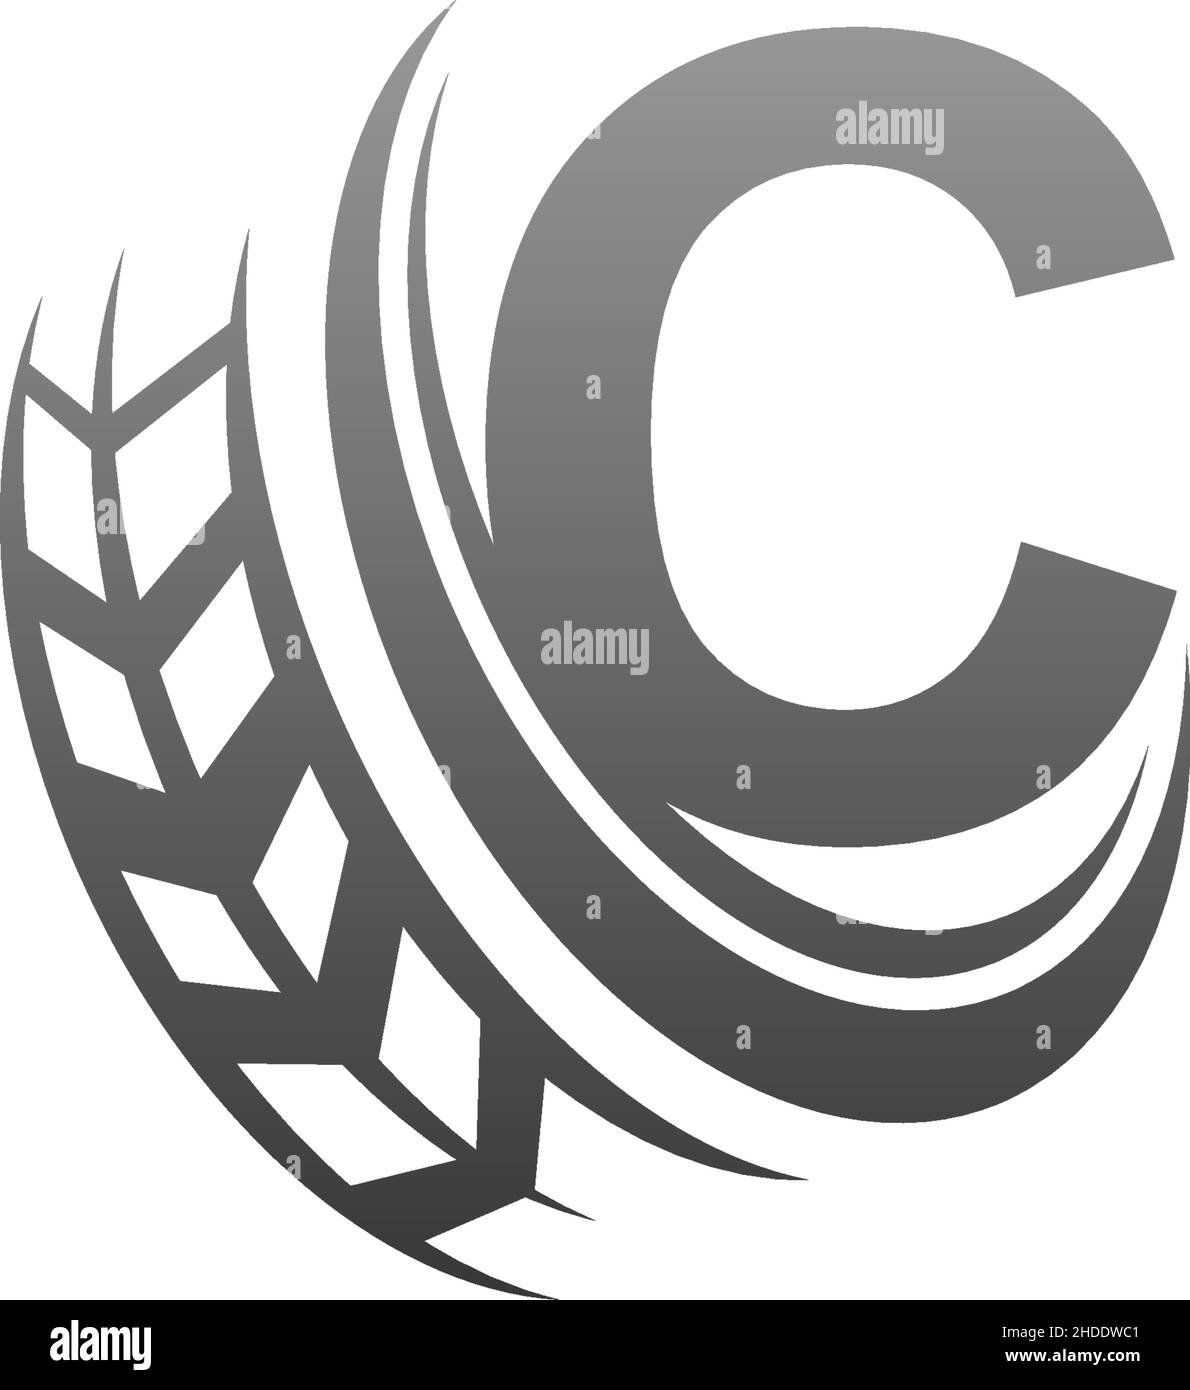 Letter C with trailing wheel icon design template illustration vector Stock Vector